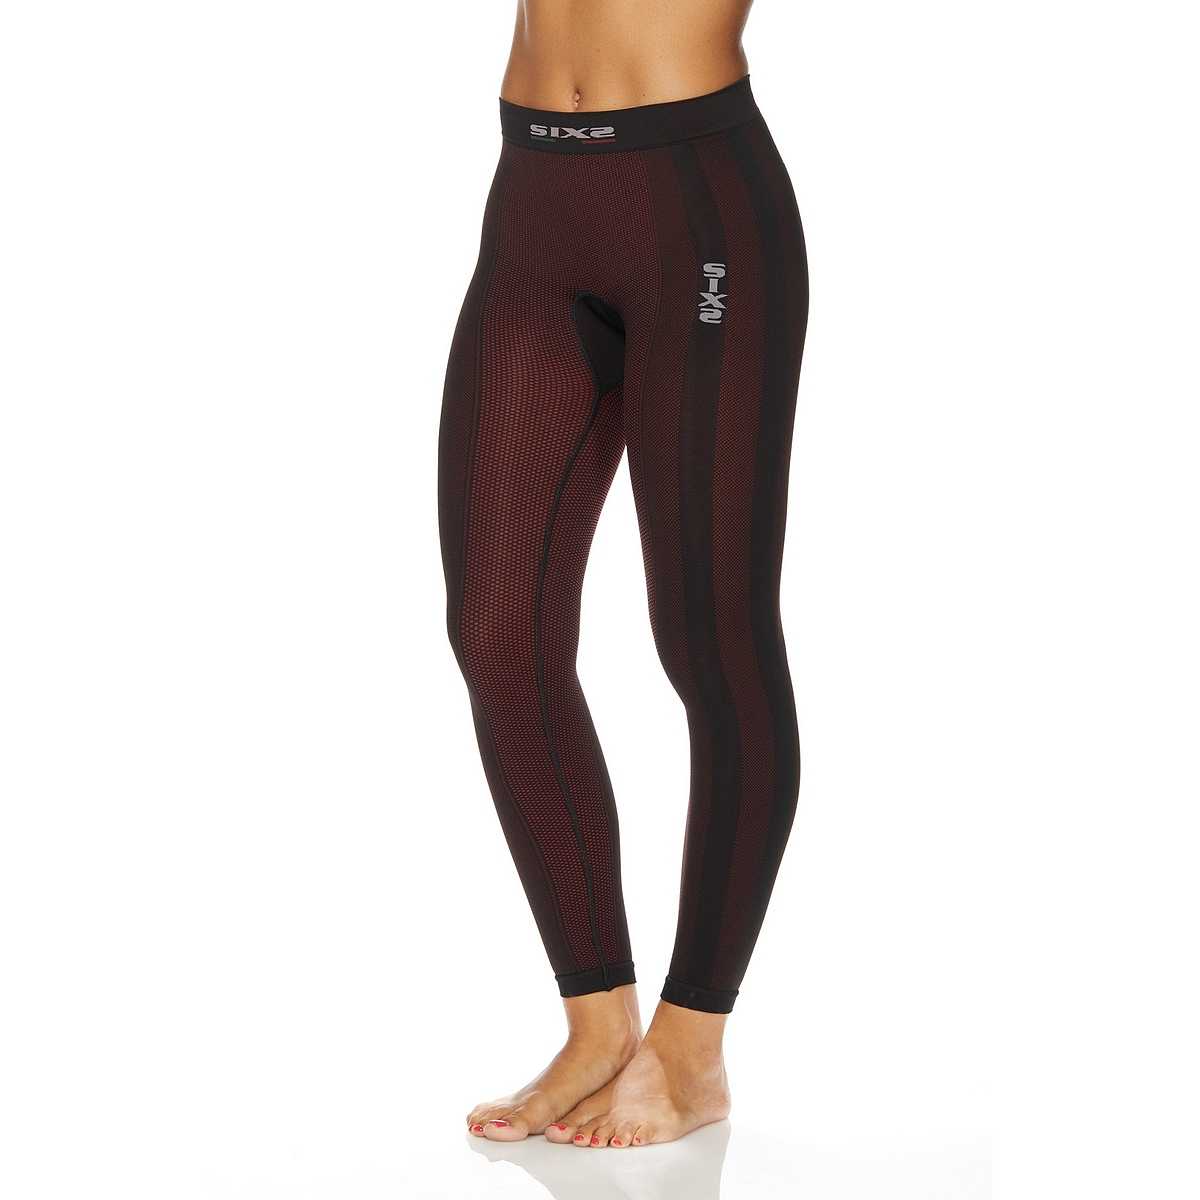 Technical pants Intimates Sixs Leggings Carbon Dark Red For Sale